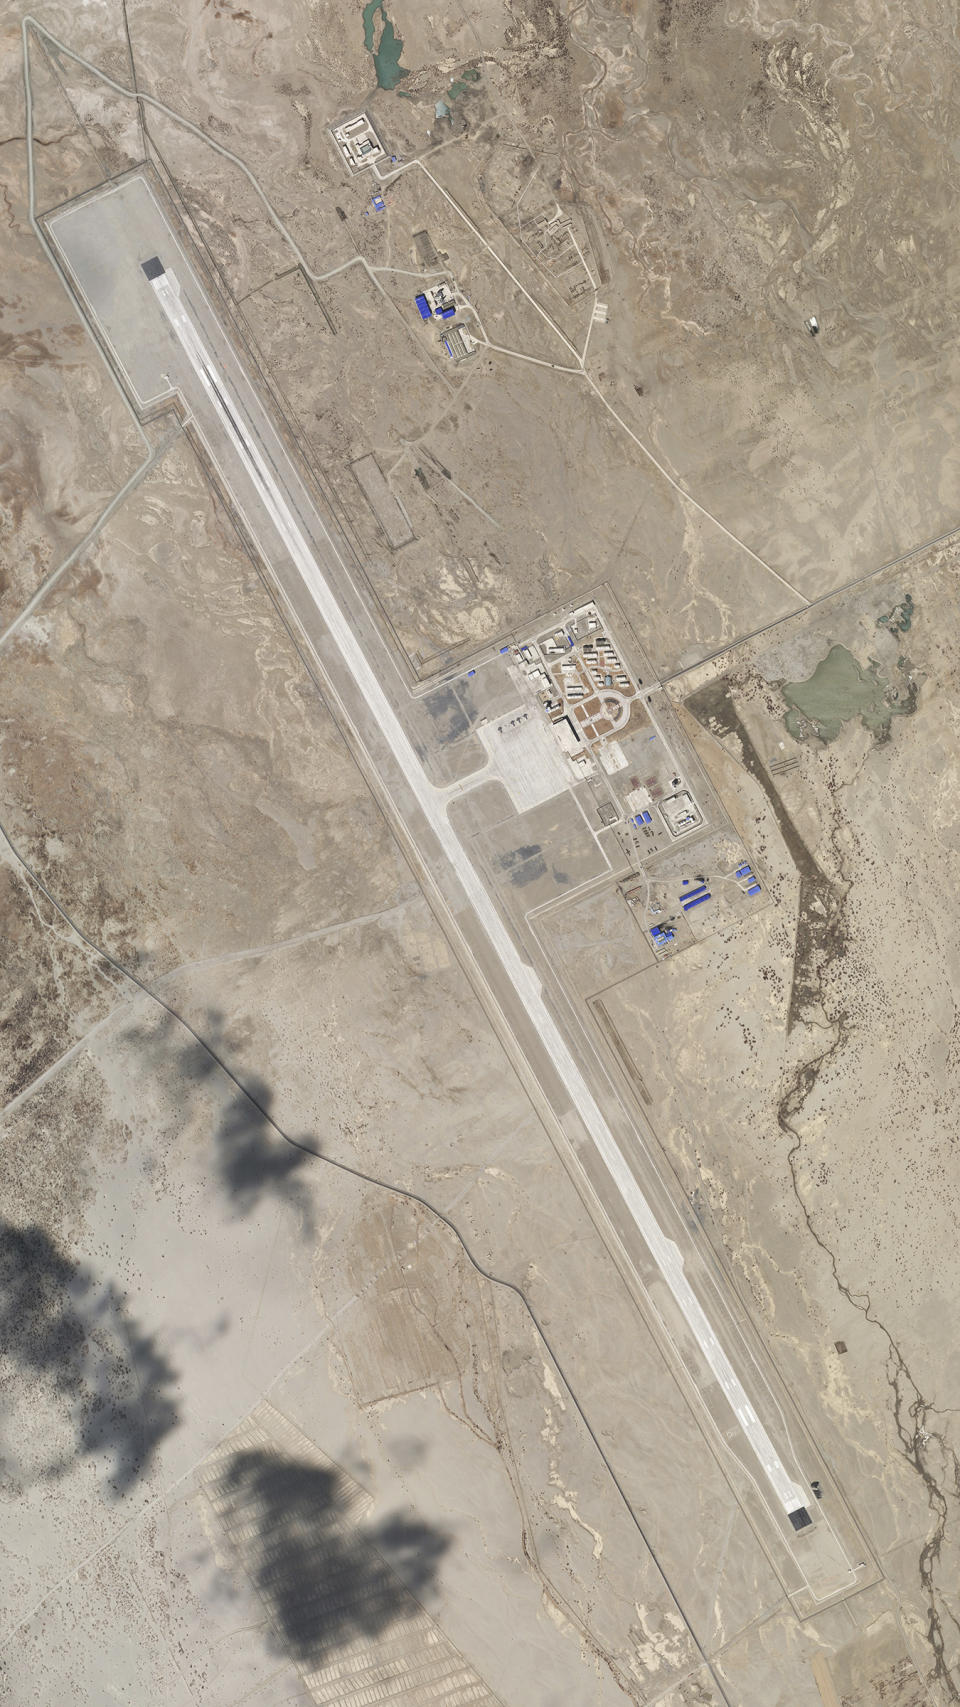 In this satellite image provided by Planet Labs, the Ngari Günsa civil-military airport base taken on April 1, 2020, near the border with India in far western region of Tibet in China shows development around the airport. Tensions along the China-India border high in the Himalayas have flared again in recent weeks. Indian officials say the latest row began in early May, when Chinese soldiers entered the Indian-controlled territory of Ladakh at three different points, erecting tents and guard posts. China has sought to downplay the confrontation while providing little information. (Planet Labs via AP)